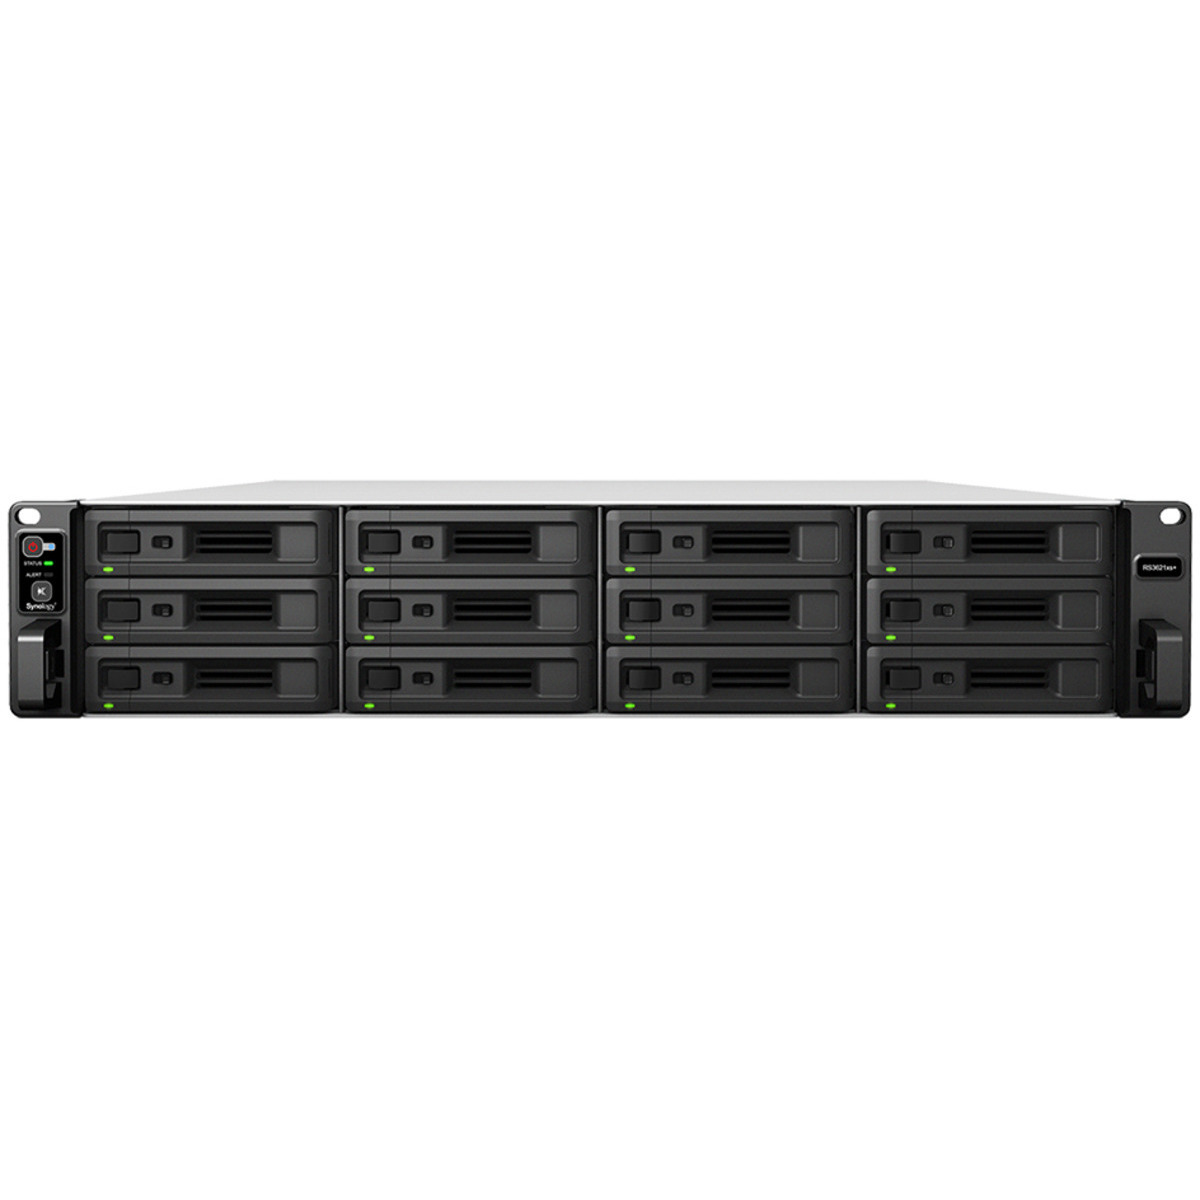 Synology RackStation RS3621xs+ 132tb 12-Bay RackMount Large Business / Enterprise NAS - Network Attached Storage Device 11x12tb Synology HAT5300 Series HAT5300-12T 3.5 7200rpm SATA 6Gb/s HDD ENTERPRISE Class Drives Installed - Burn-In Tested RackStation RS3621xs+